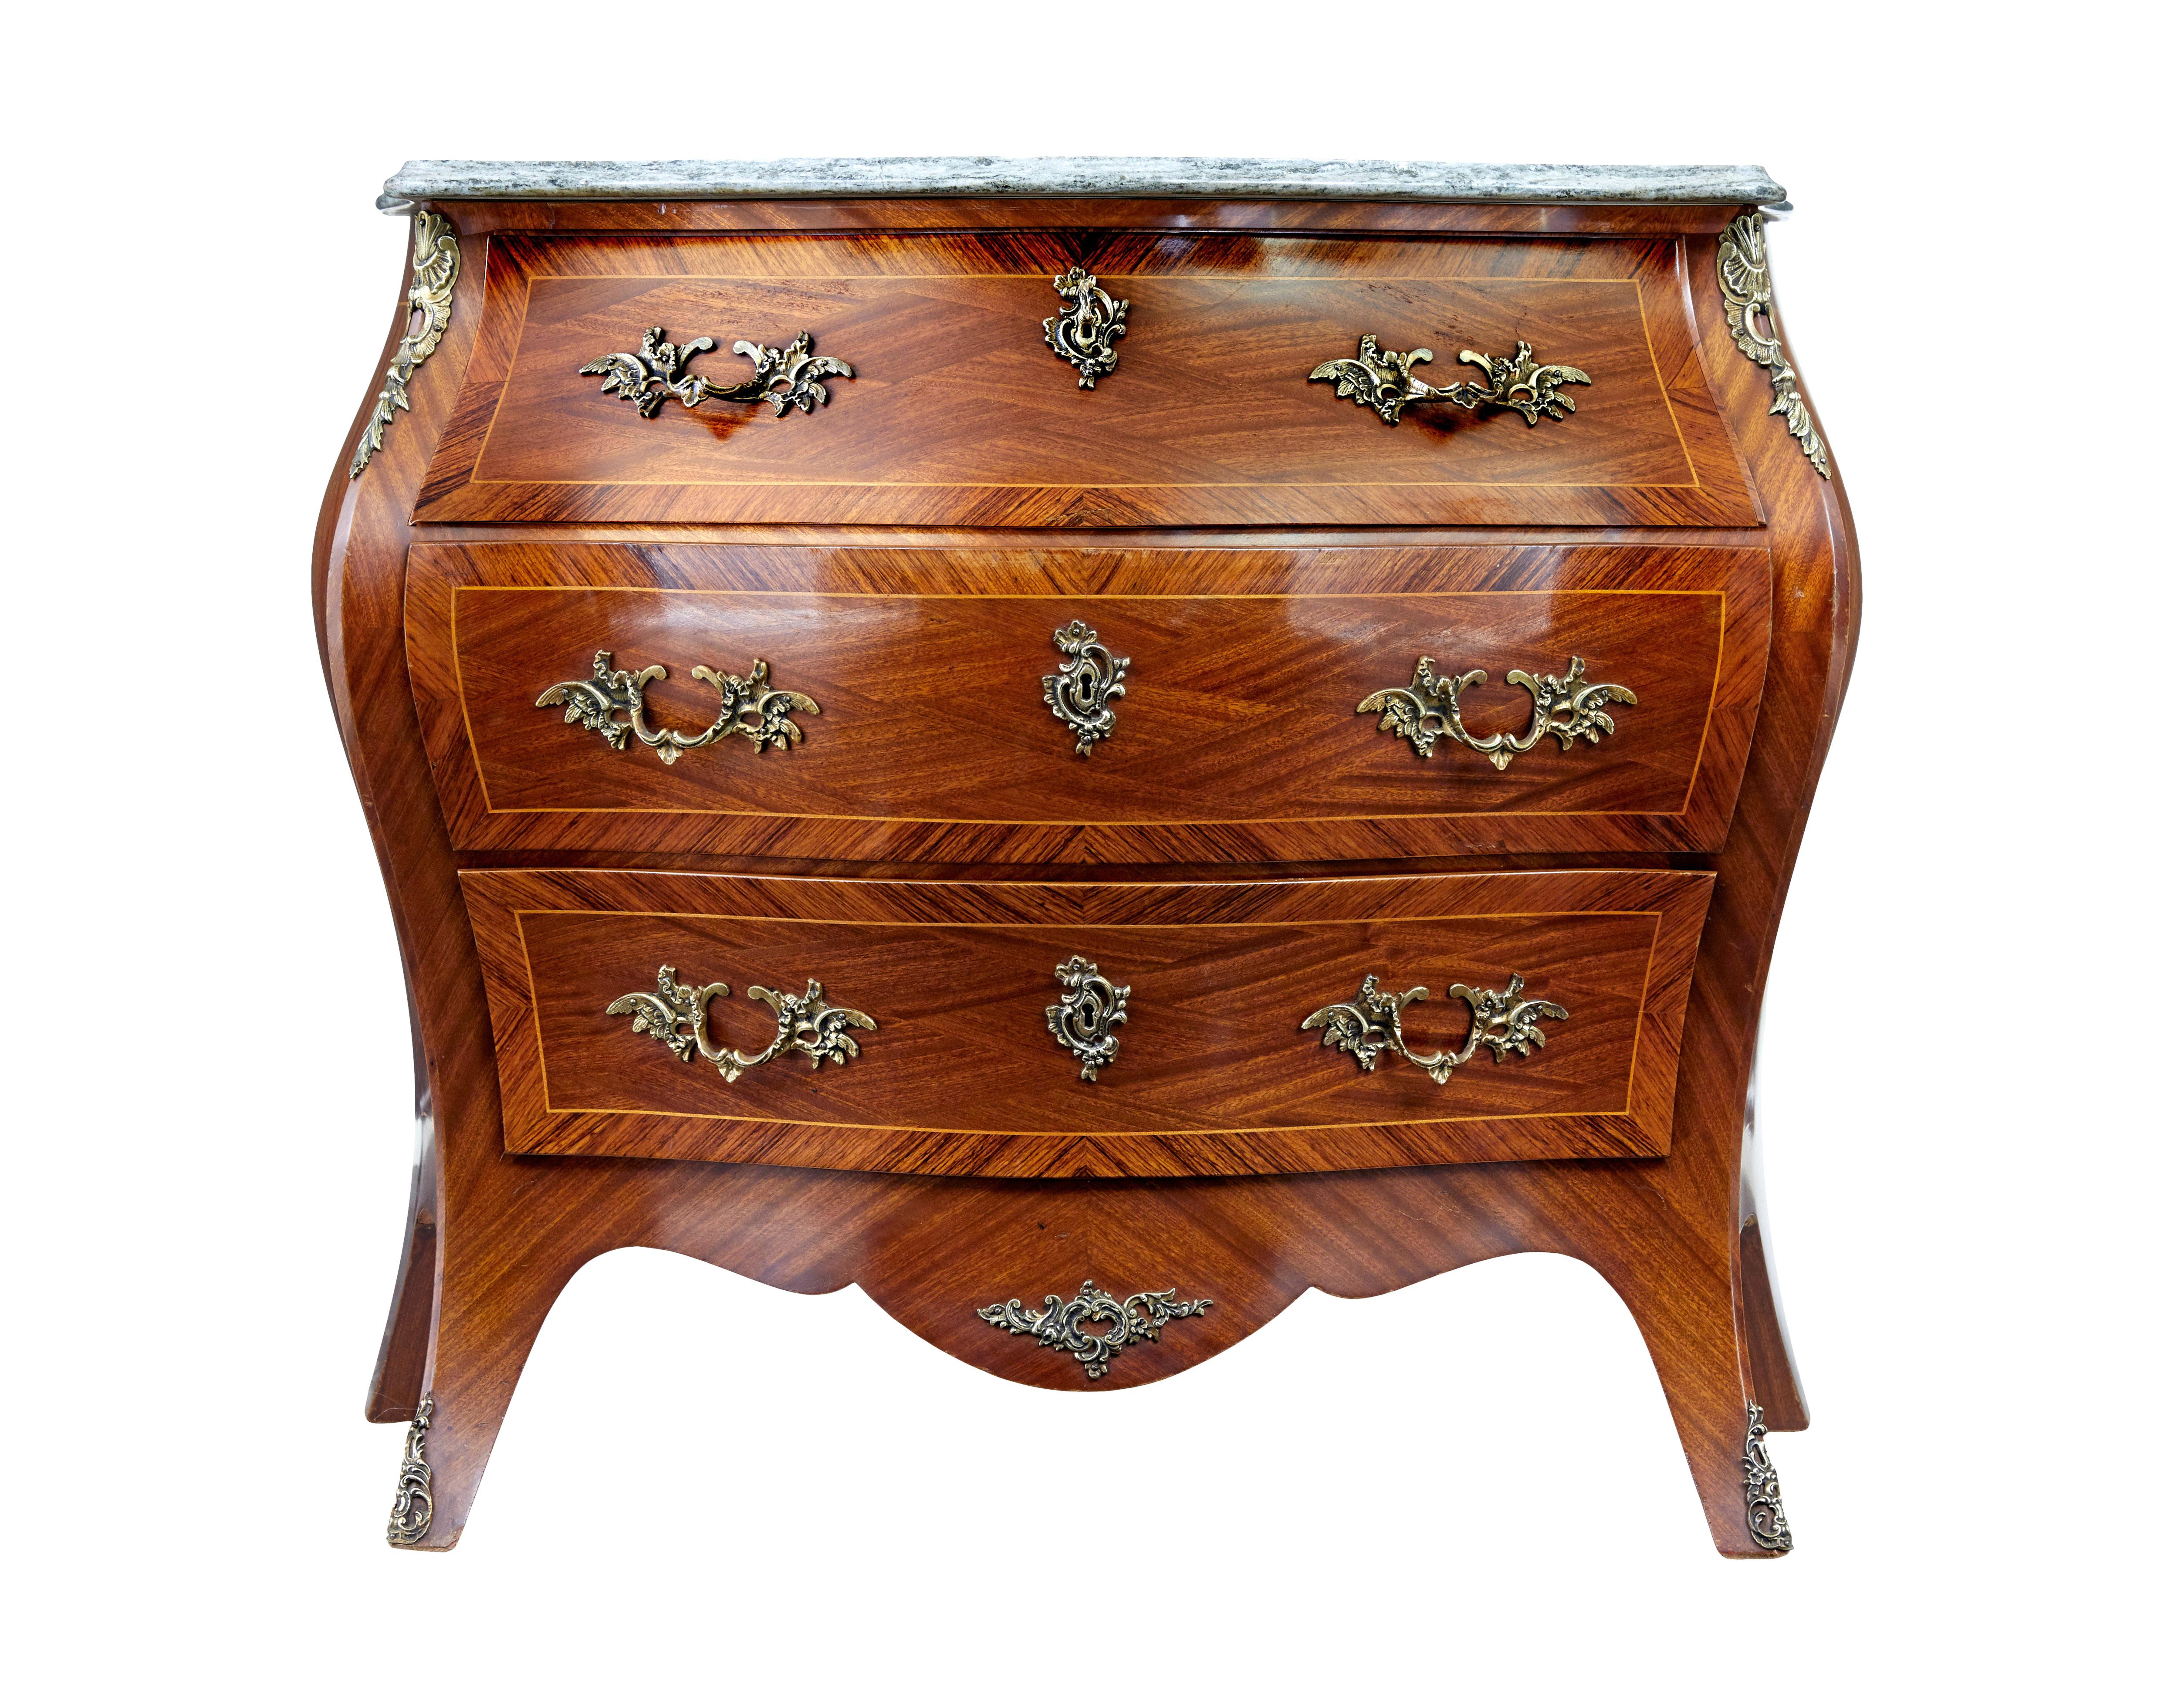 Mid-20th century kingwood and mahogany bombe commode chest of drawers, circa 1950.

Good quality rococo inspired 3-drawer commode. Bombe shaped commode. Mahogany arranged veneers, with stringing and cross-banded in kingwood. Each drawer fitted with